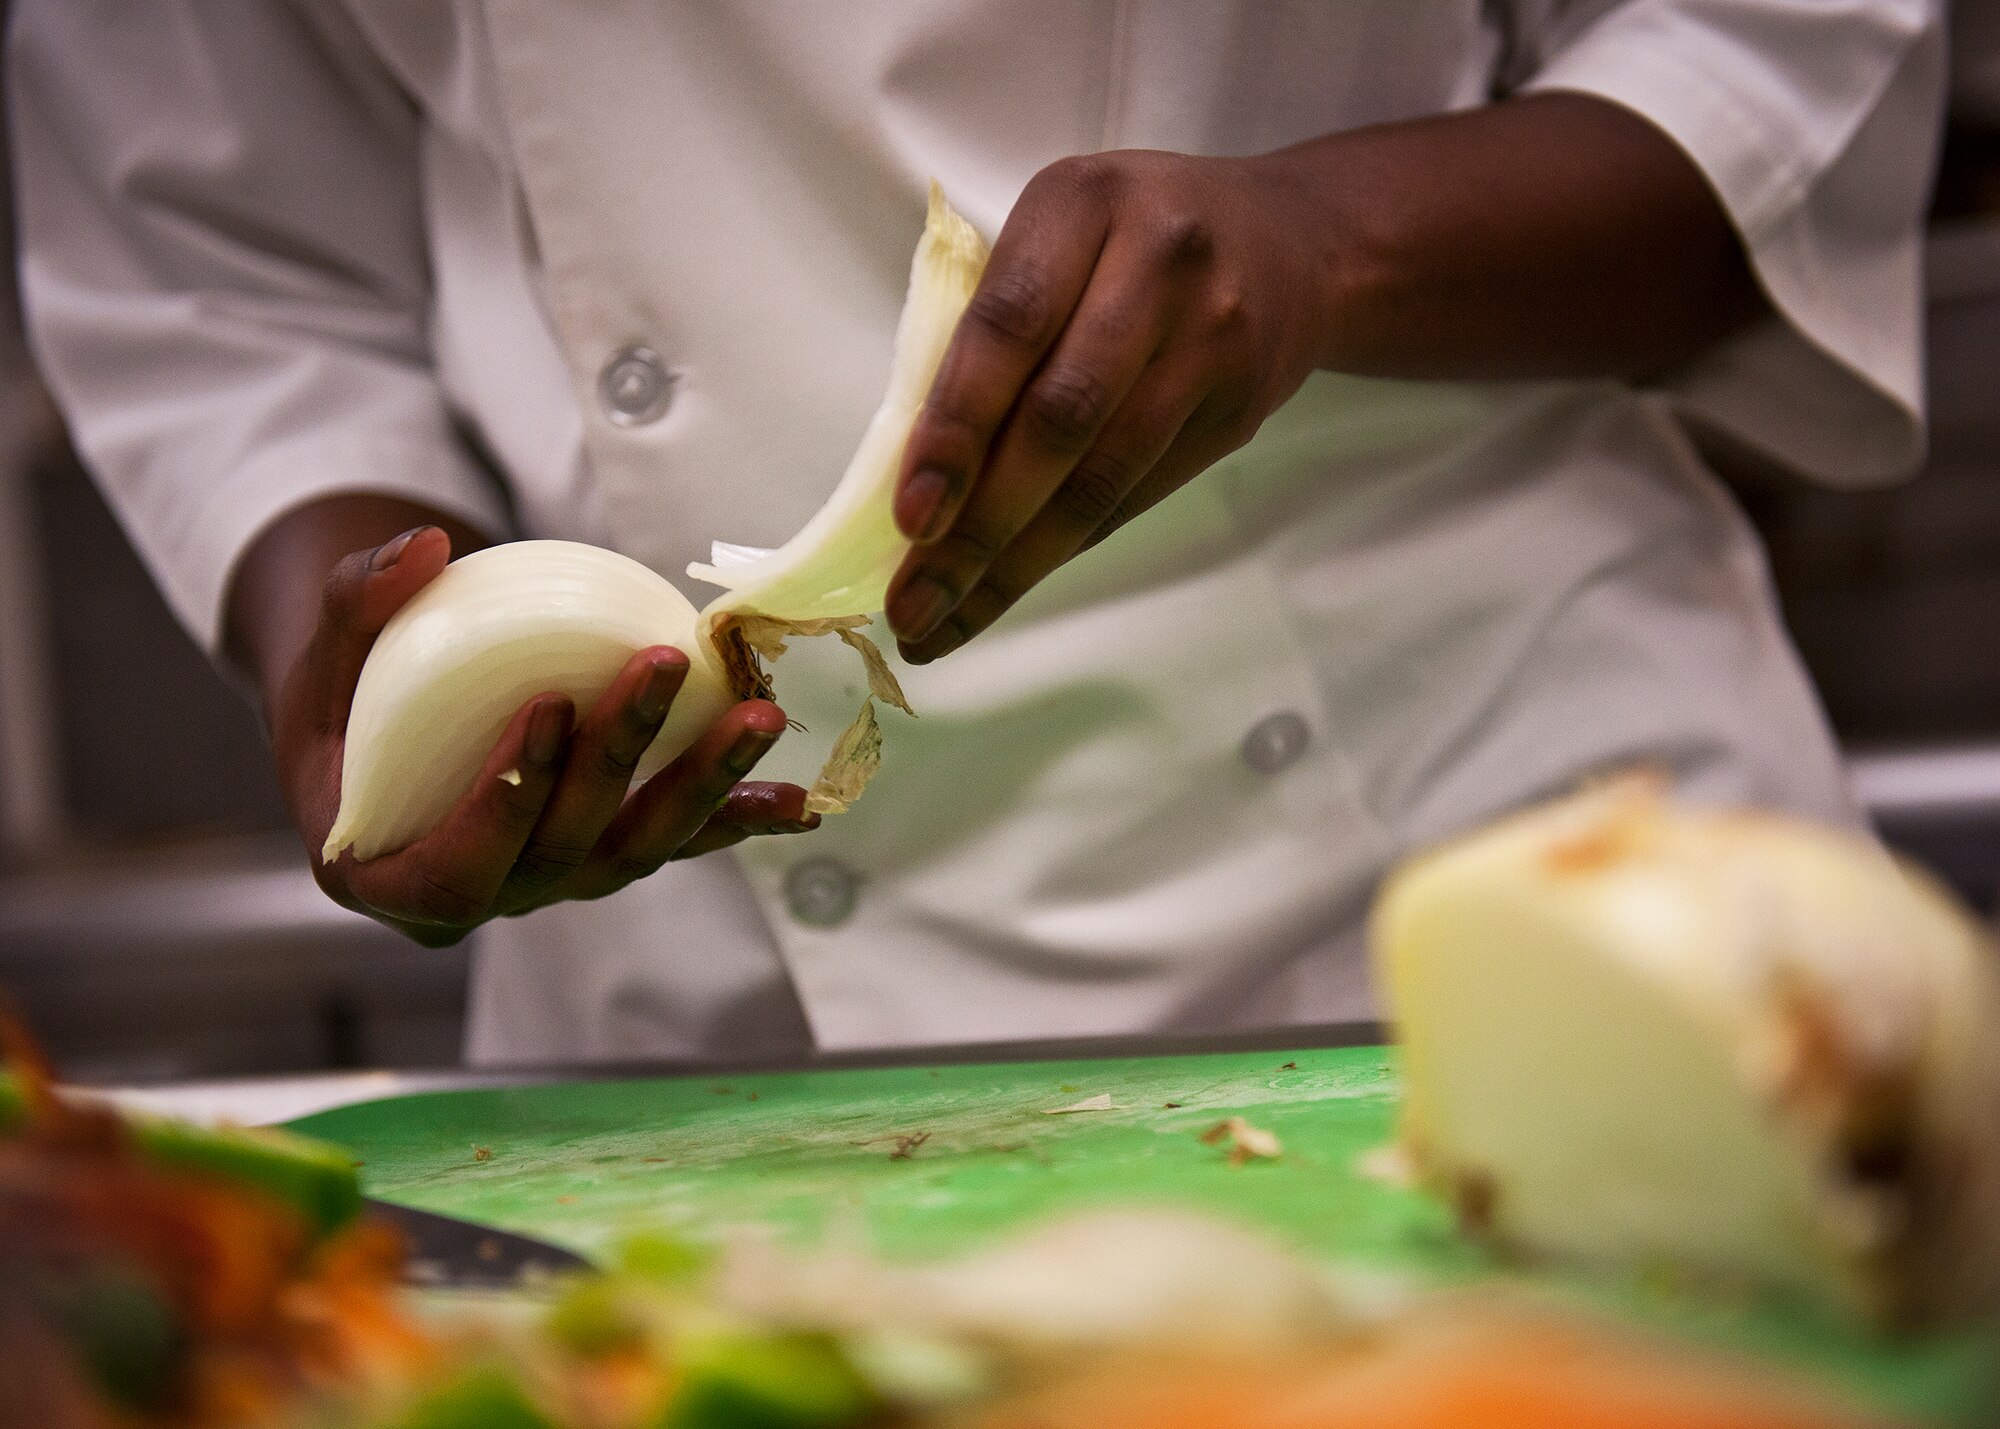 Senior Airman LaToya Grover peels the skin from an onion during her meal preparation for the base’s first “Chopped” cooking competition July 24 at Eglin.  Five Airmen from the 96th Force Support Squadron had an hour to cook a meal with three secret ingredients.  (U.S. Air Force photo/Samuel King Jr.)